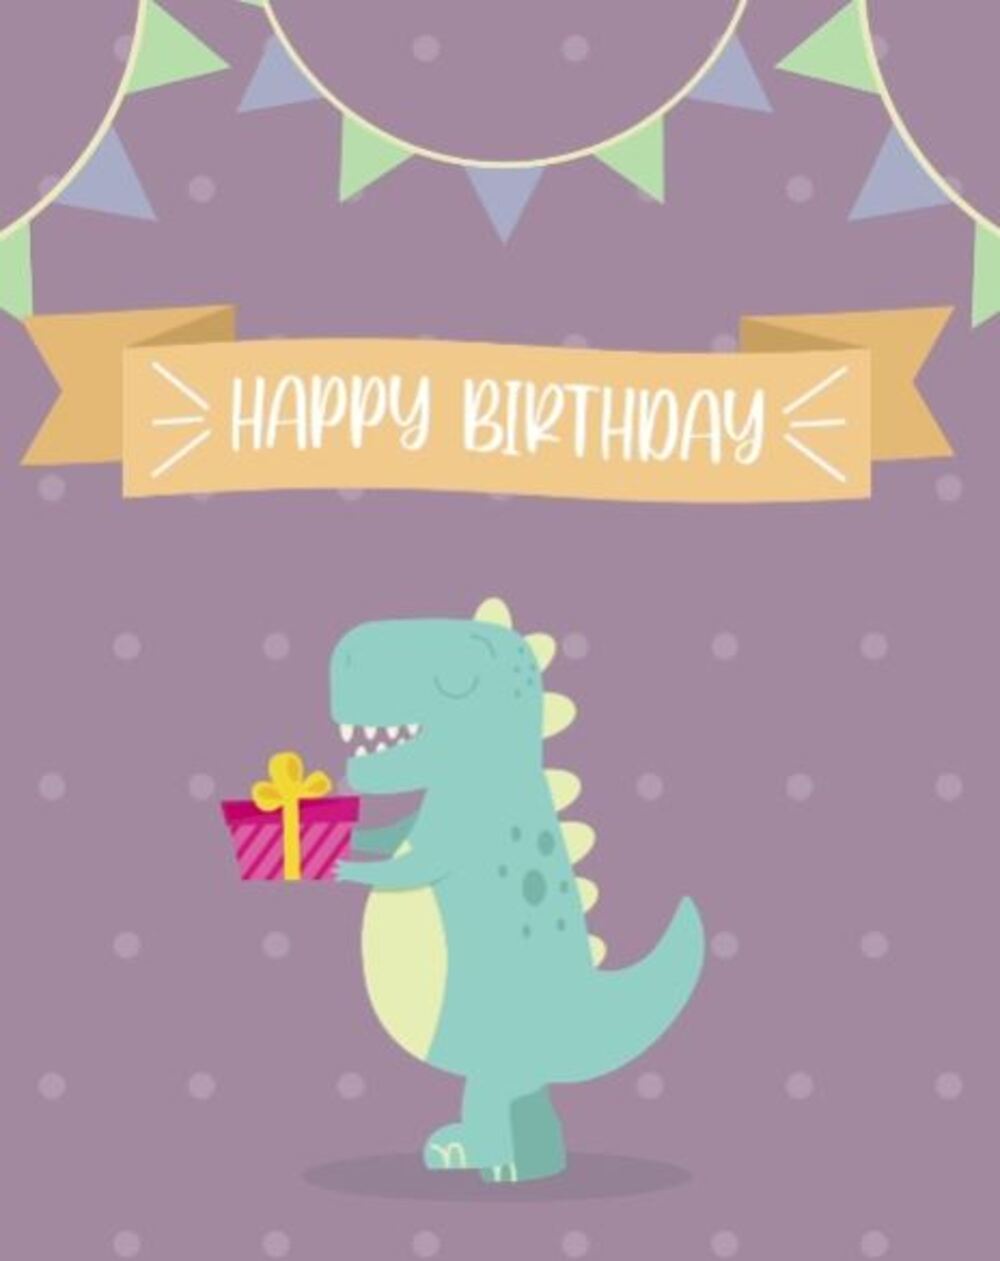 3 20+ Cute and Funny Happy Birthday Free Animated GIFs